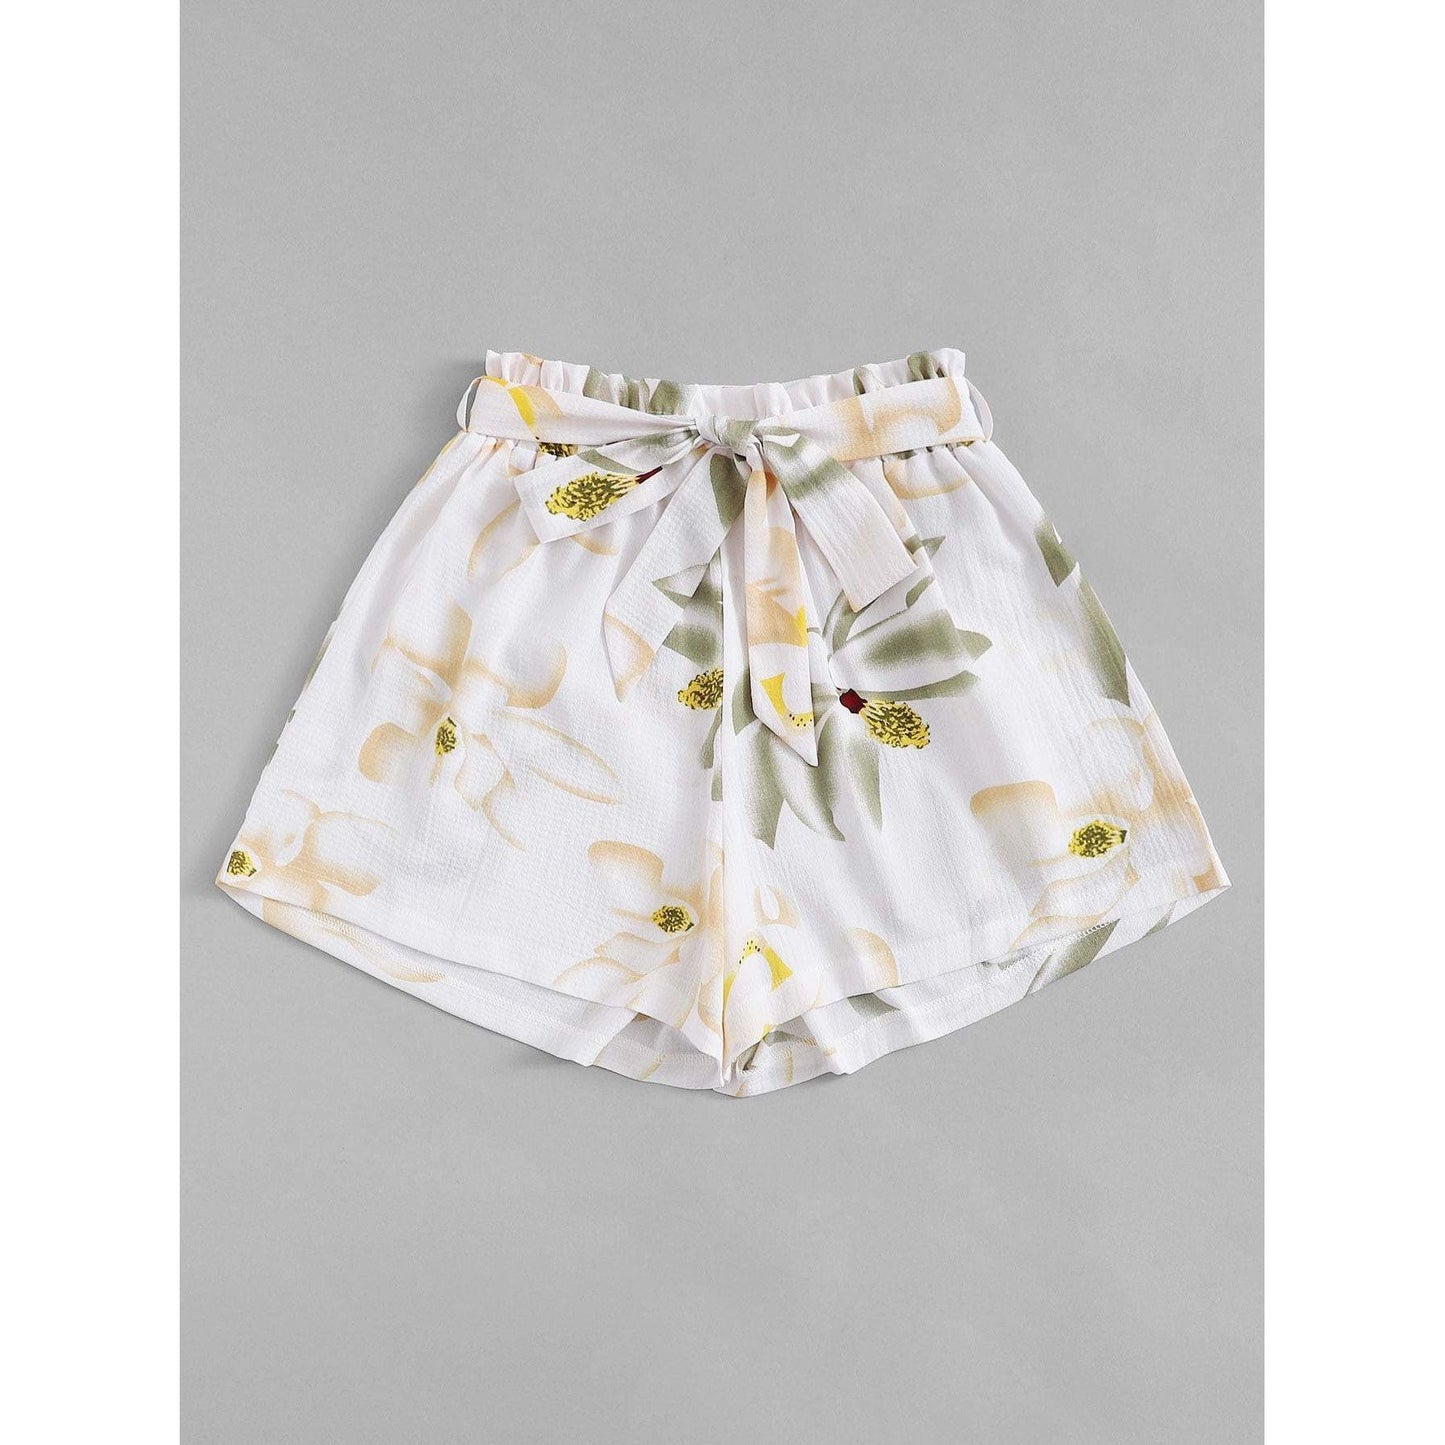 Chill Floral Print Self Tie Shorts